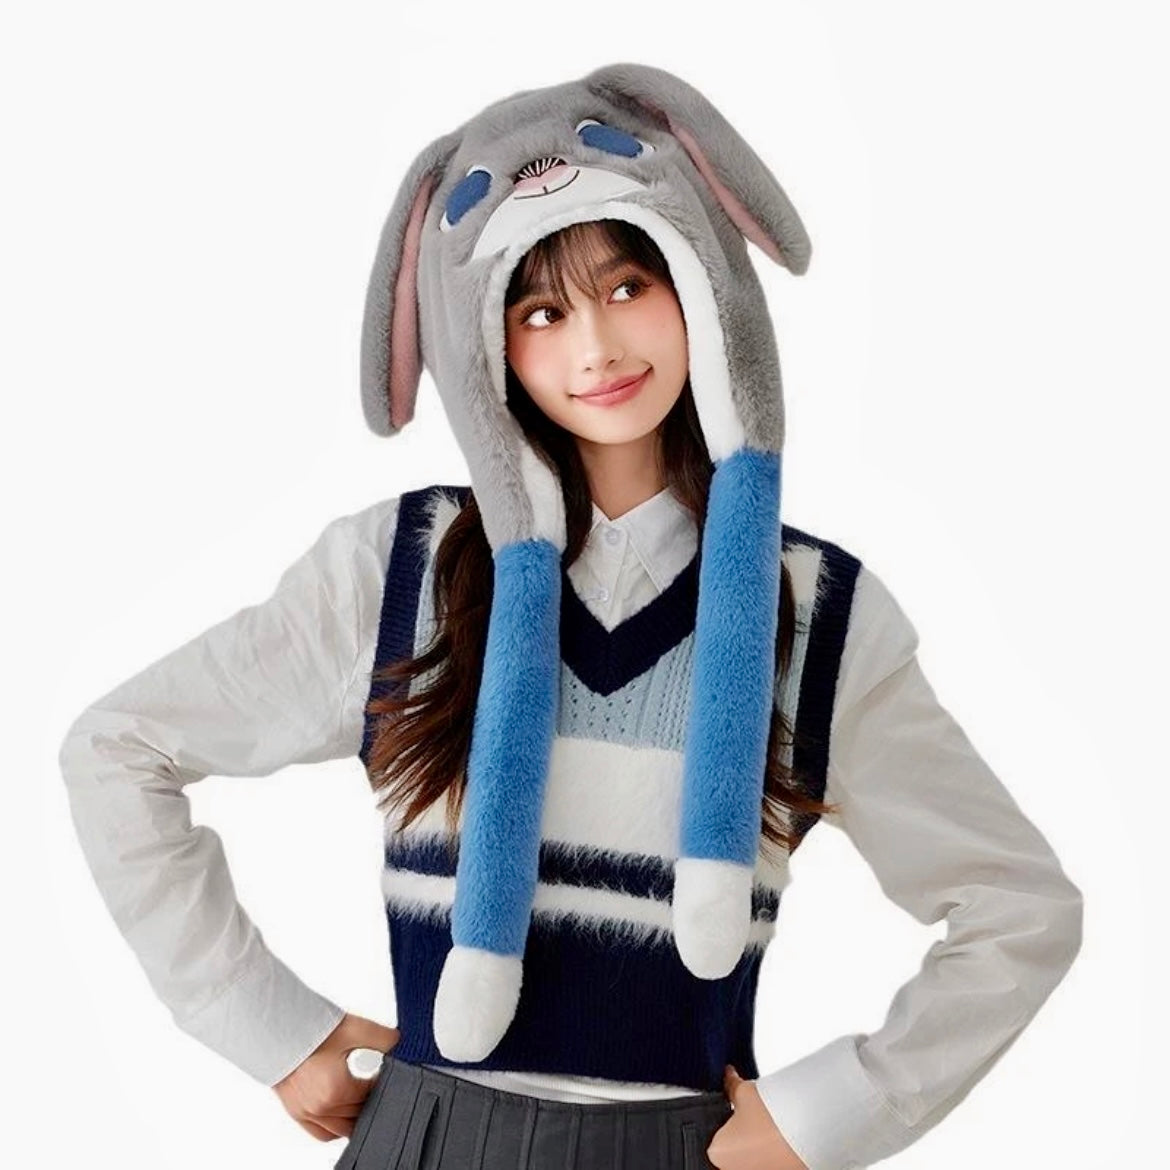 【Ahhkawaii】Winter New Cute Fox and Rabbit Hat, Scarf, and Gloves Three-in-One Plush Set